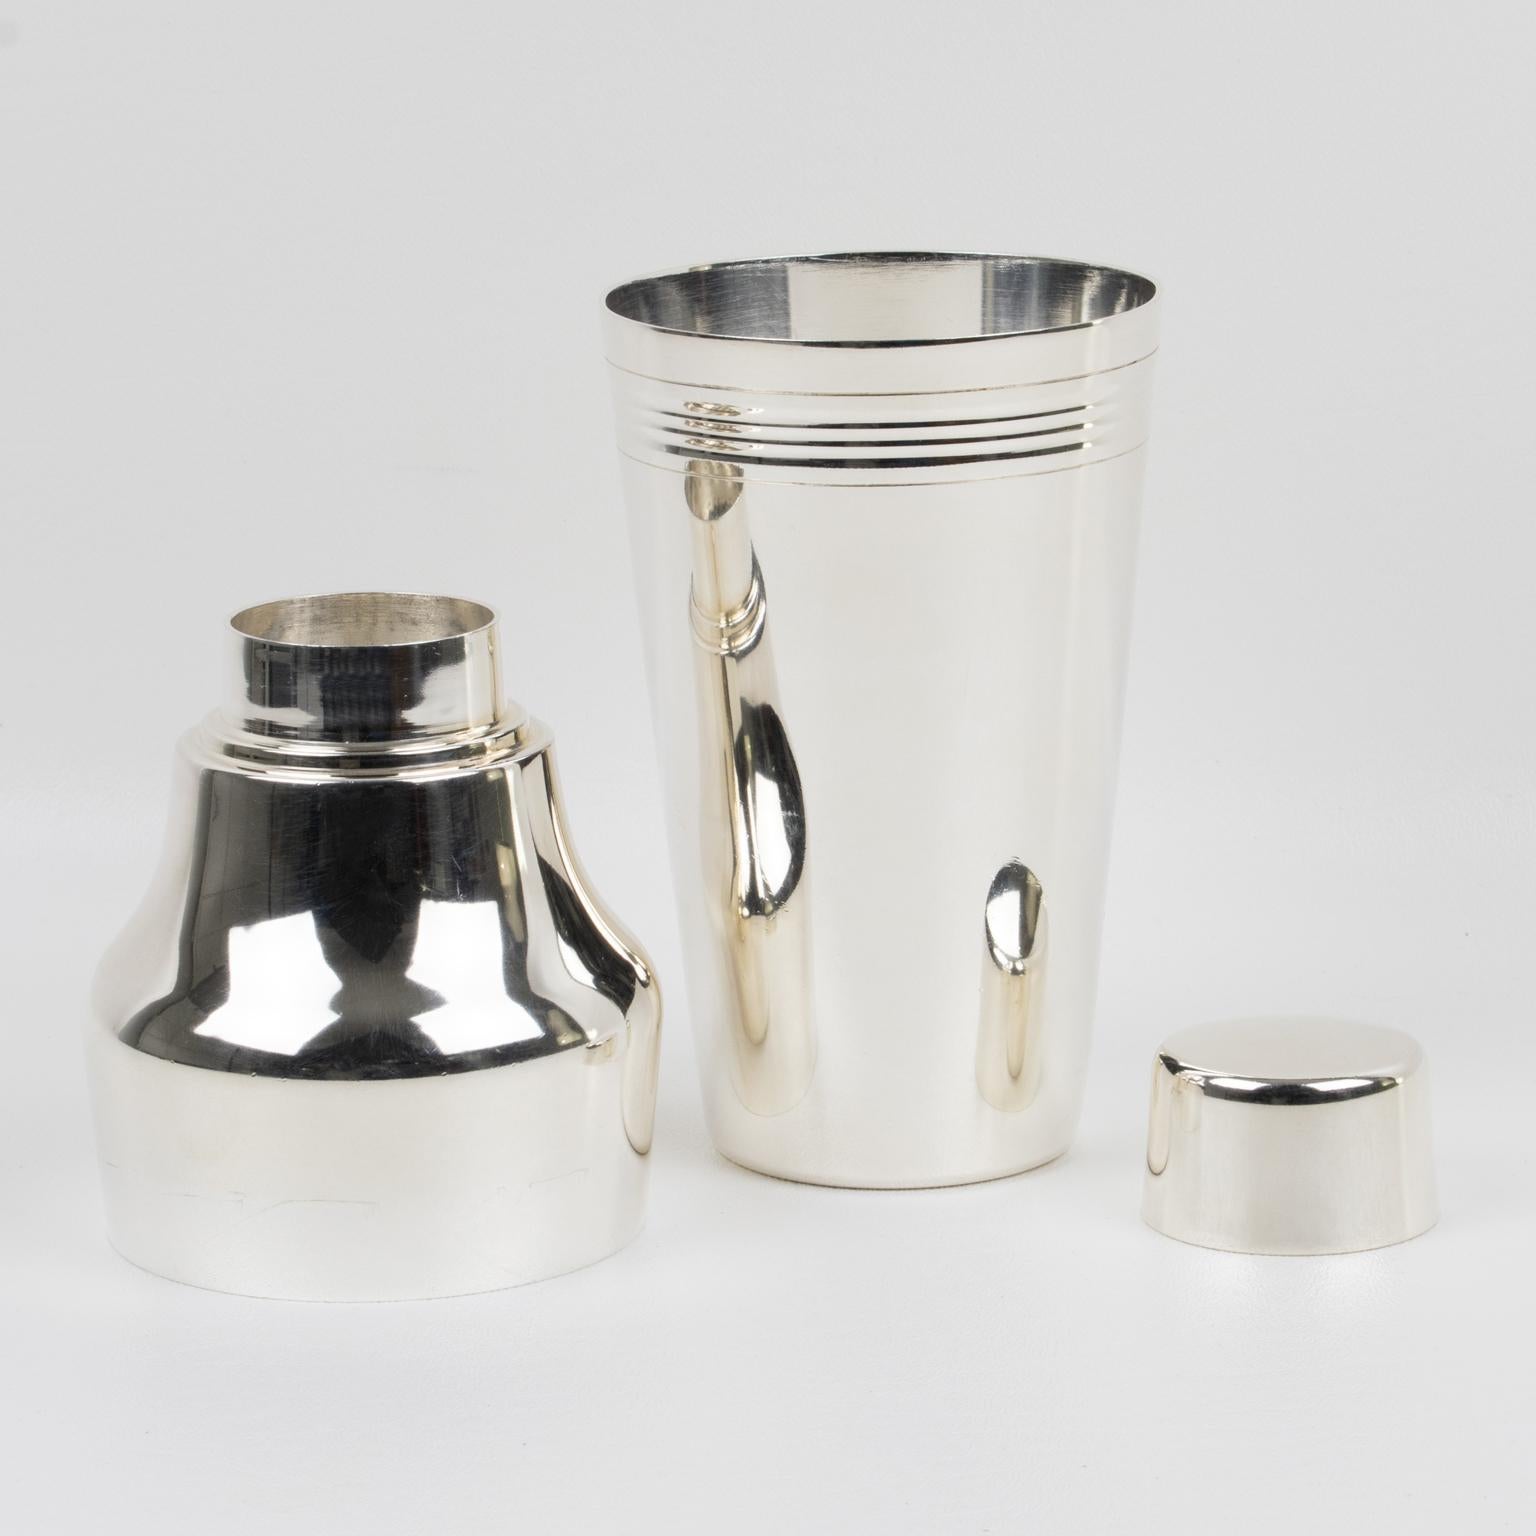 An elegant French Art Deco silver plate cocktail or Martini shaker created by Alois Straszak for Silversmith Le Crabe, Paris. Boston-type shaker, the strainer goes inside the container. Three-sectioned cylindrical designed cocktail shaker with